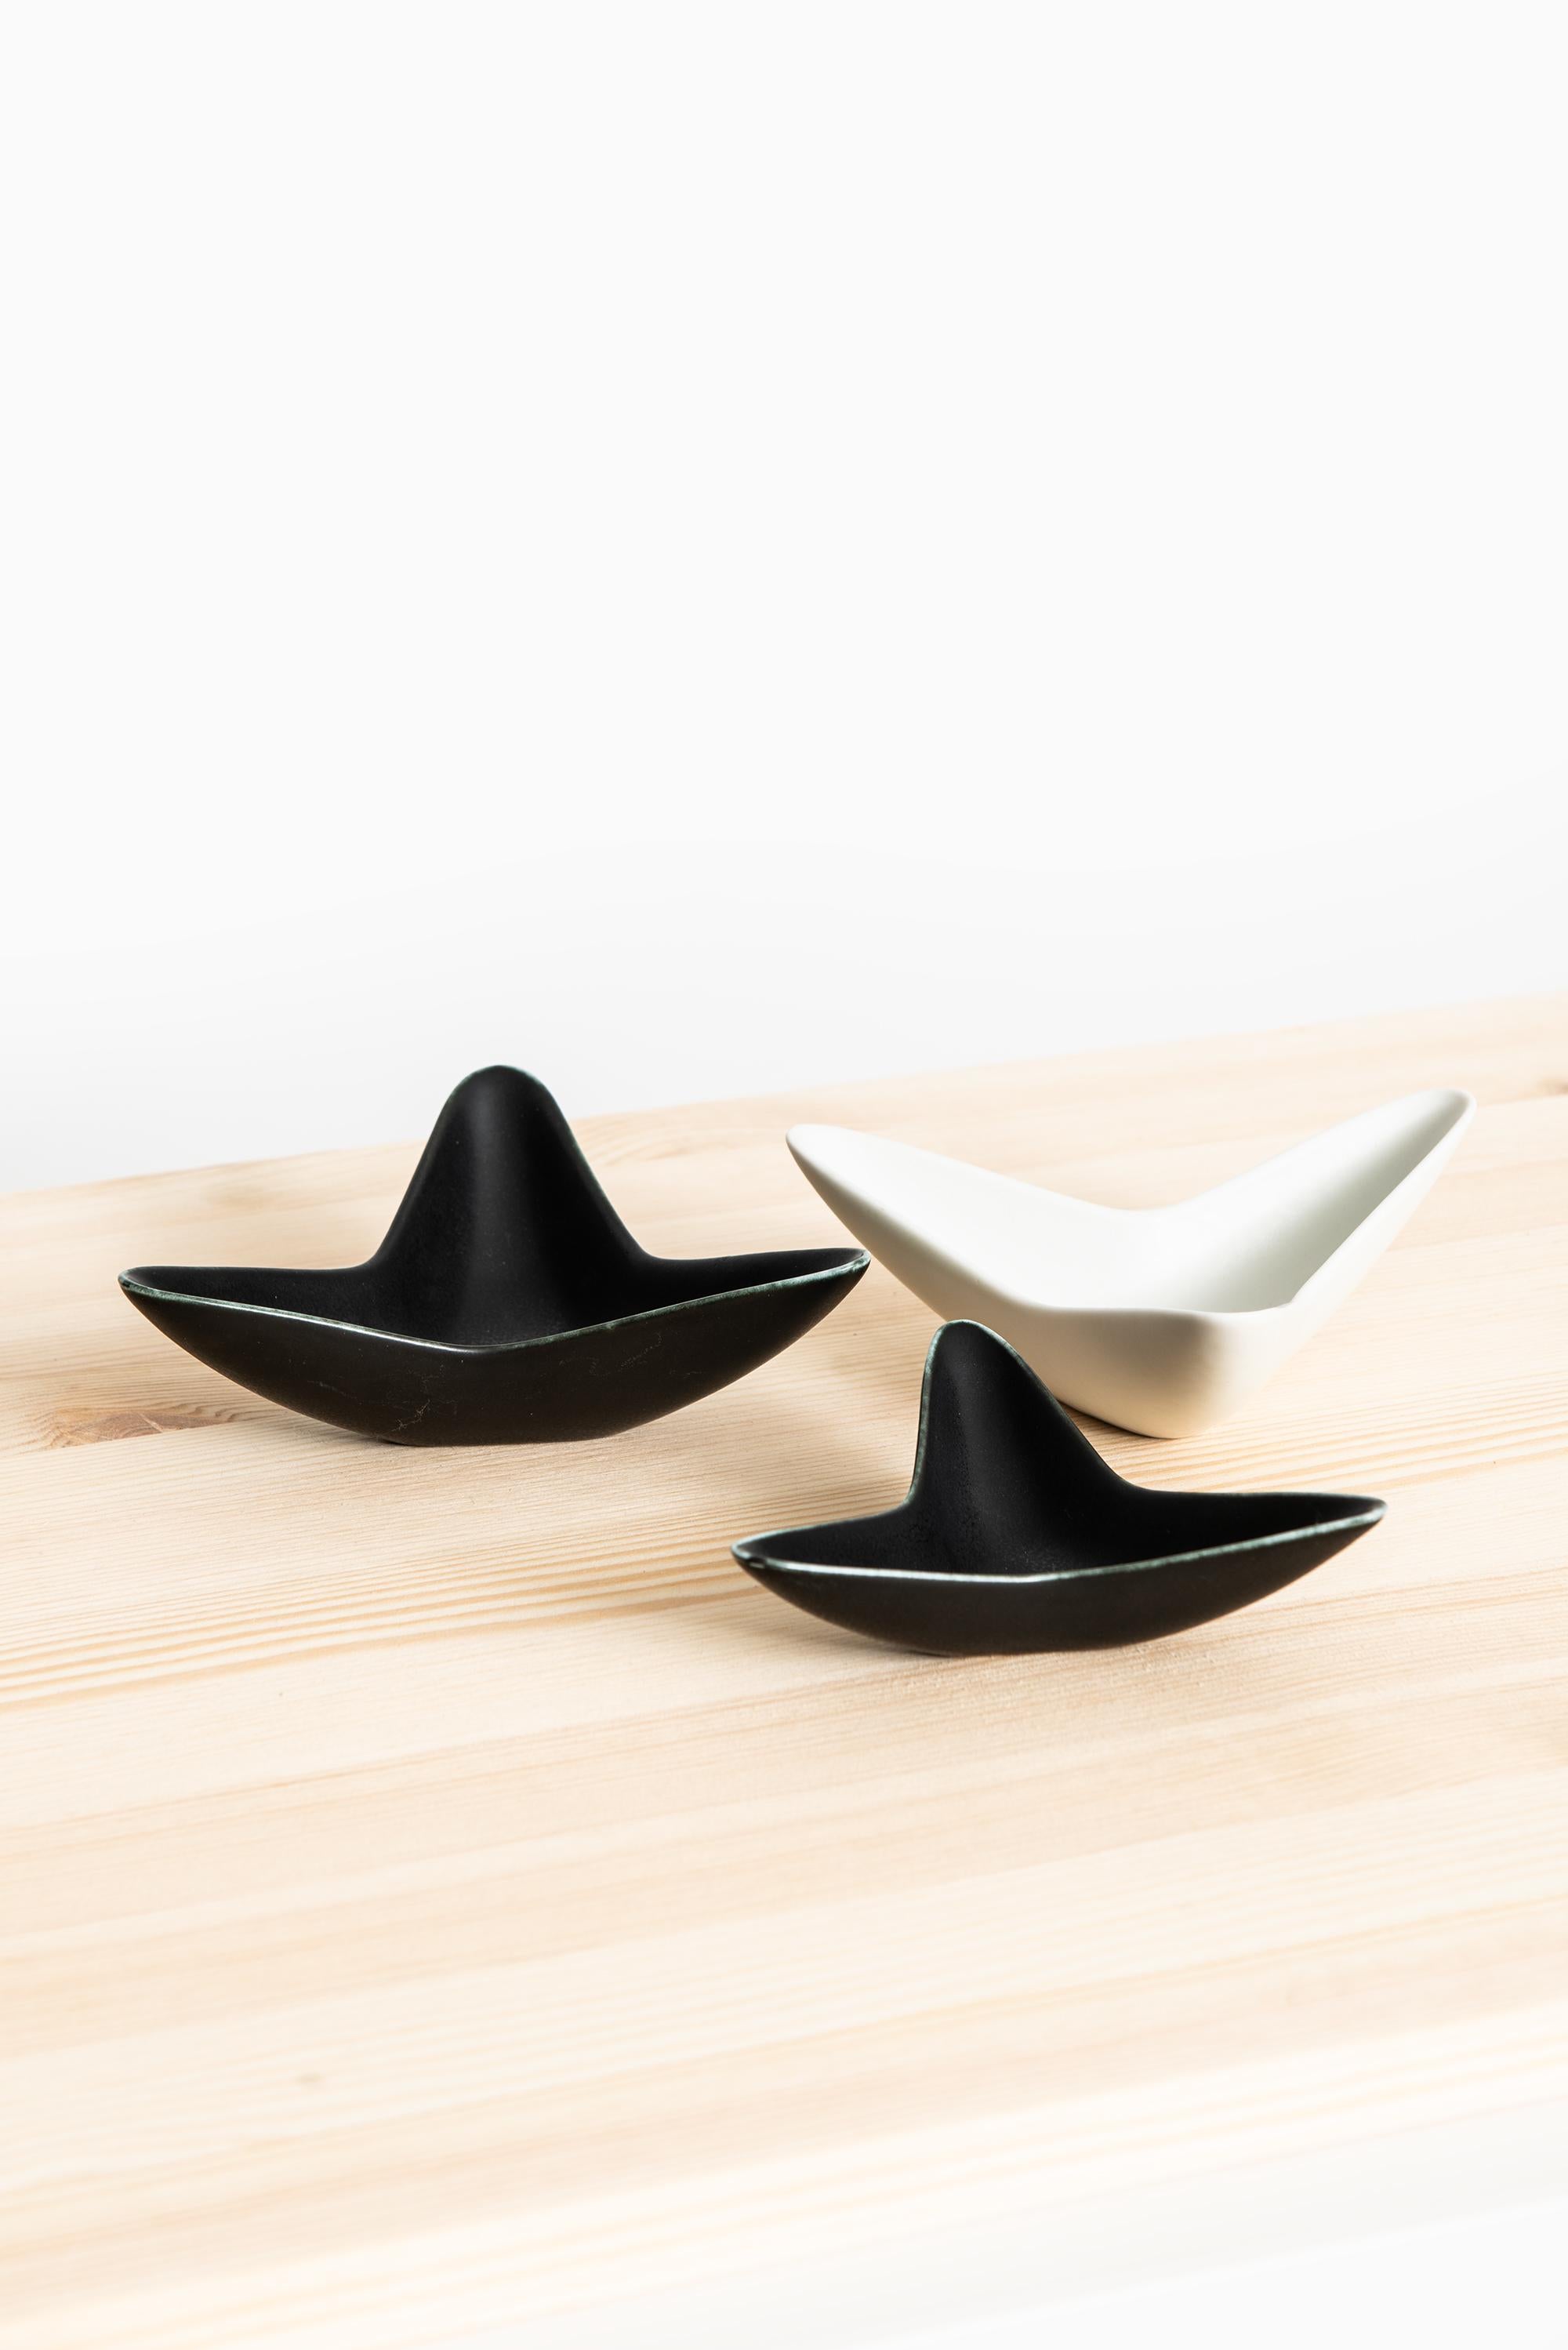 Set of 3 ceramic bowls model Caolina designed by Gunnar Nylund. Produced by Rörstrand in Sweden.